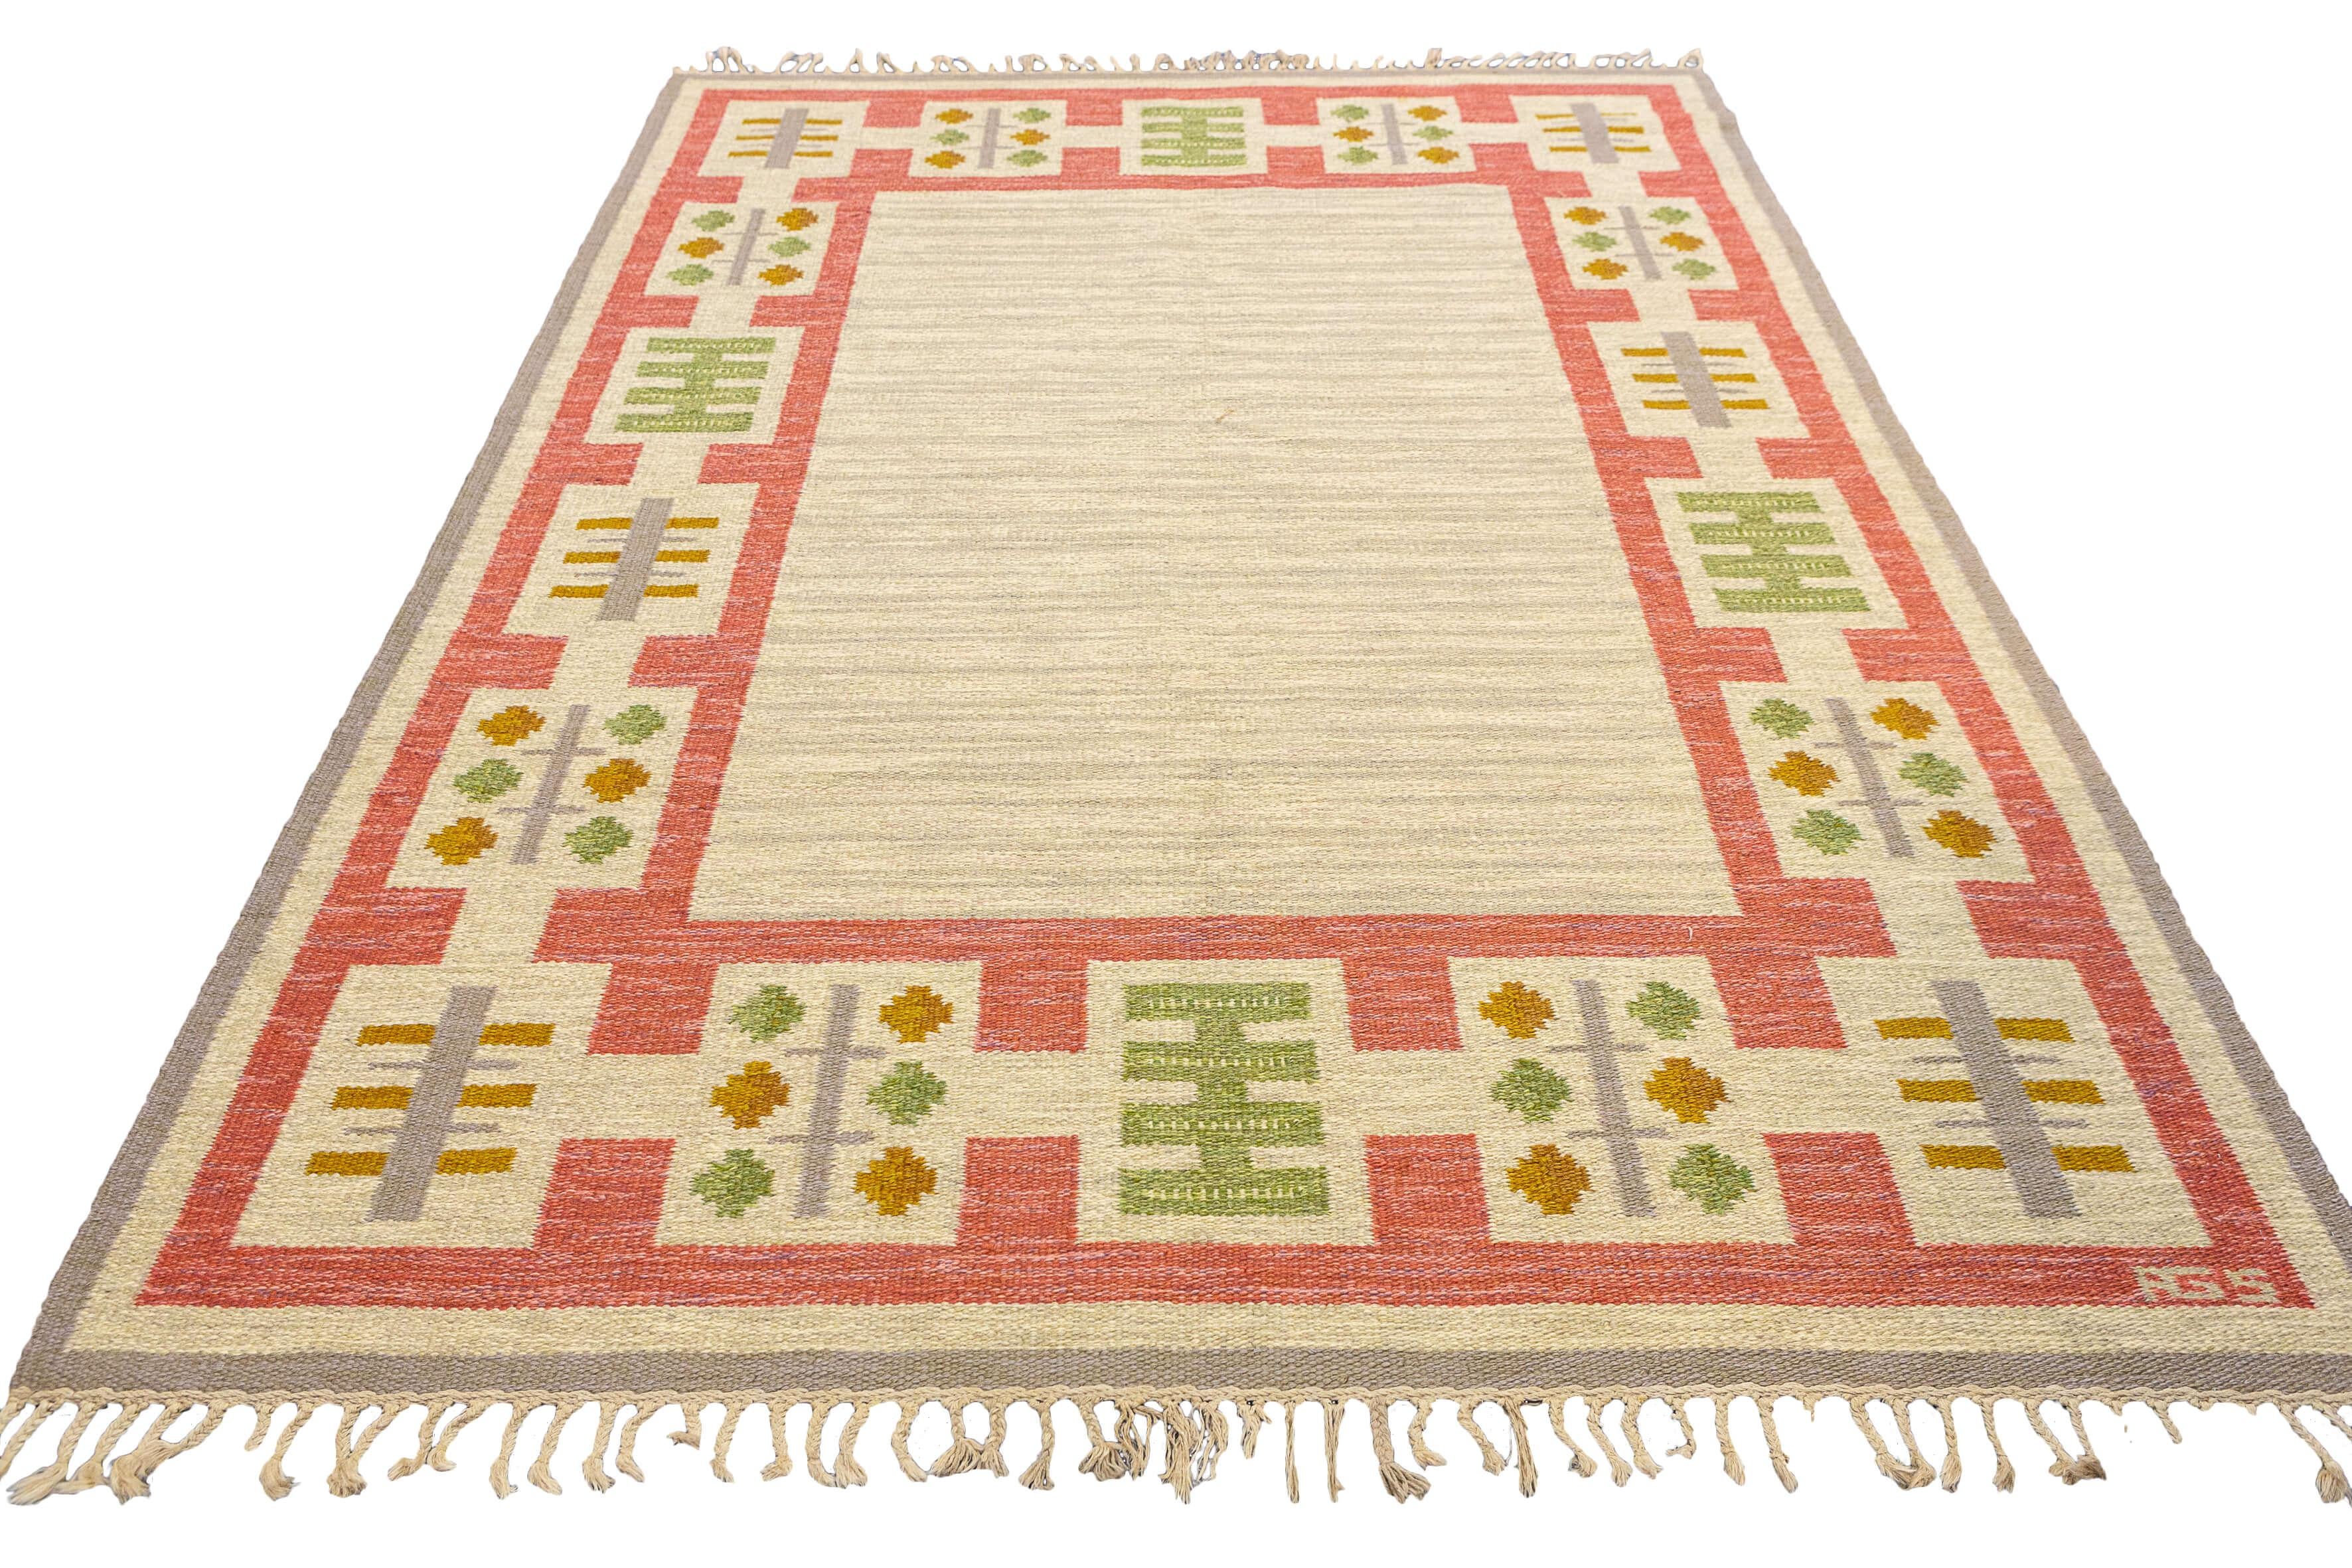 This is an interesting Scandinavian Rollakan Swedish rug in a captivating combination of beige and pink colors. This exquisite piece stands out for its distinctive design, exceptional craftsmanship, and the fusion of traditional Scandinavian